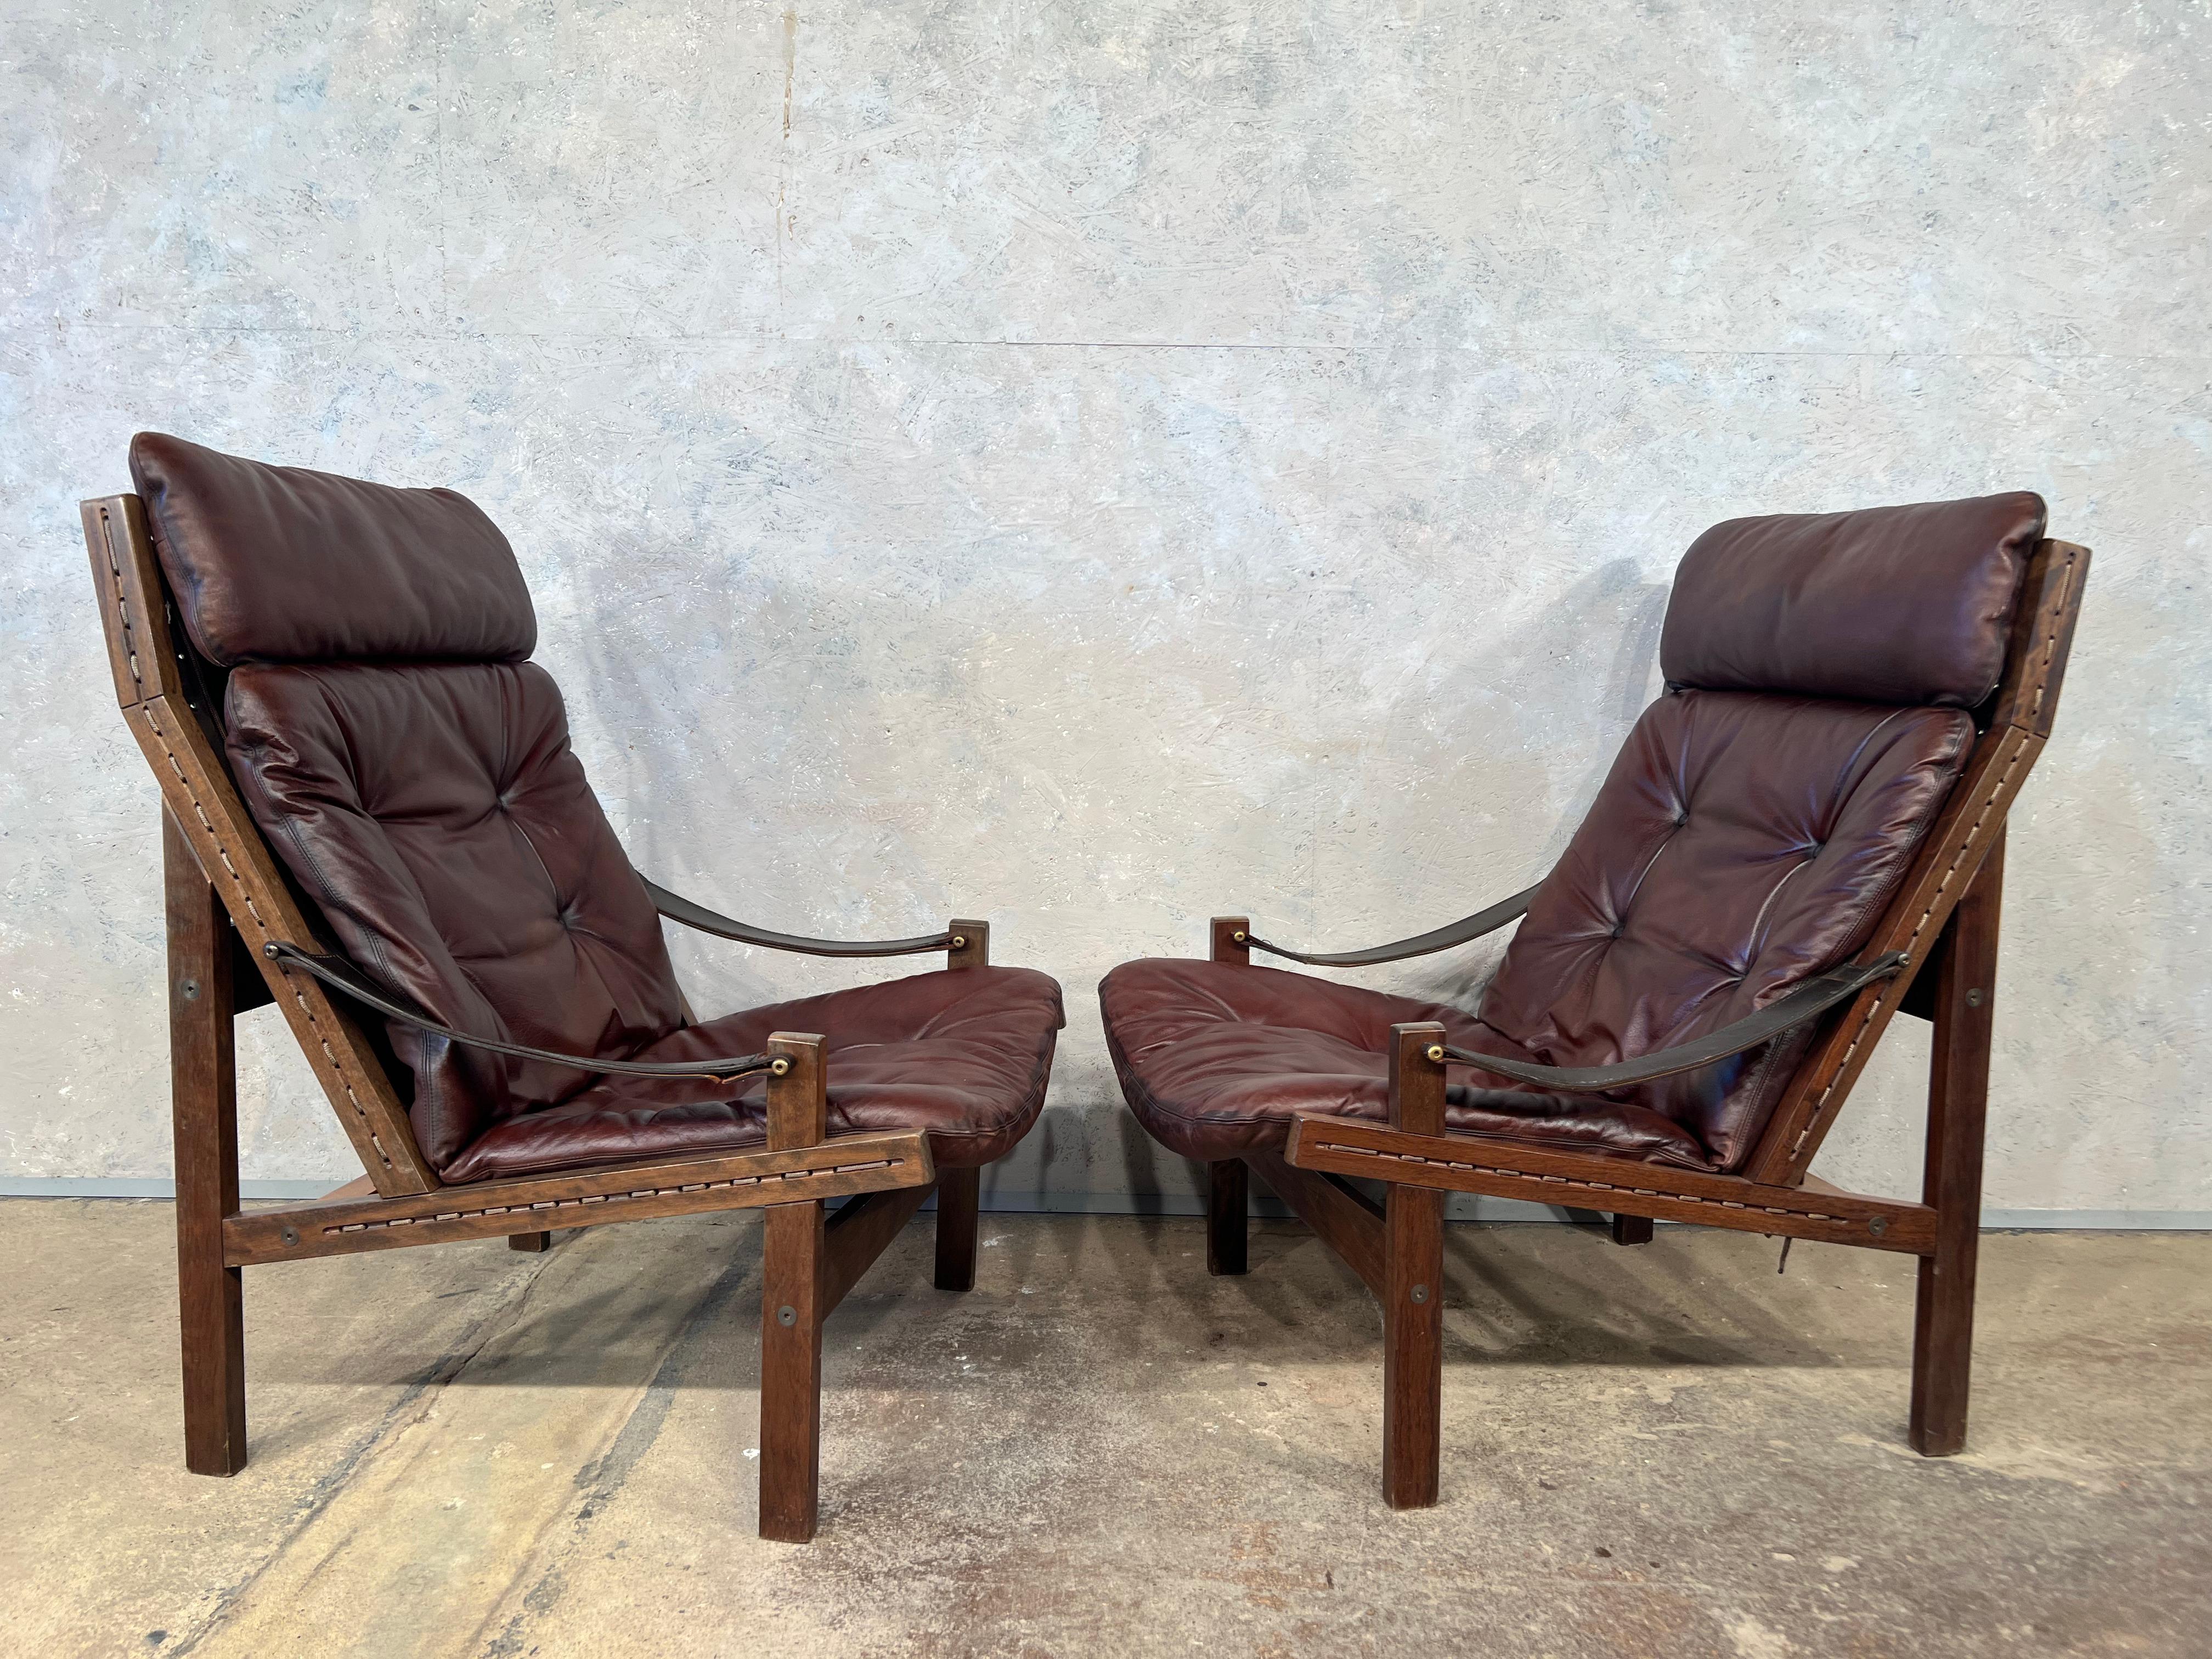 A pair of Hunter lounge chair with rich brown leather and solid Rosewood frame. Canvas weave holding the leather cushion up. Designed in the 1960s by Norwegian Torbjørn Afdal for Bruksbo.

Good vintage condition. Patinated with signs of wear